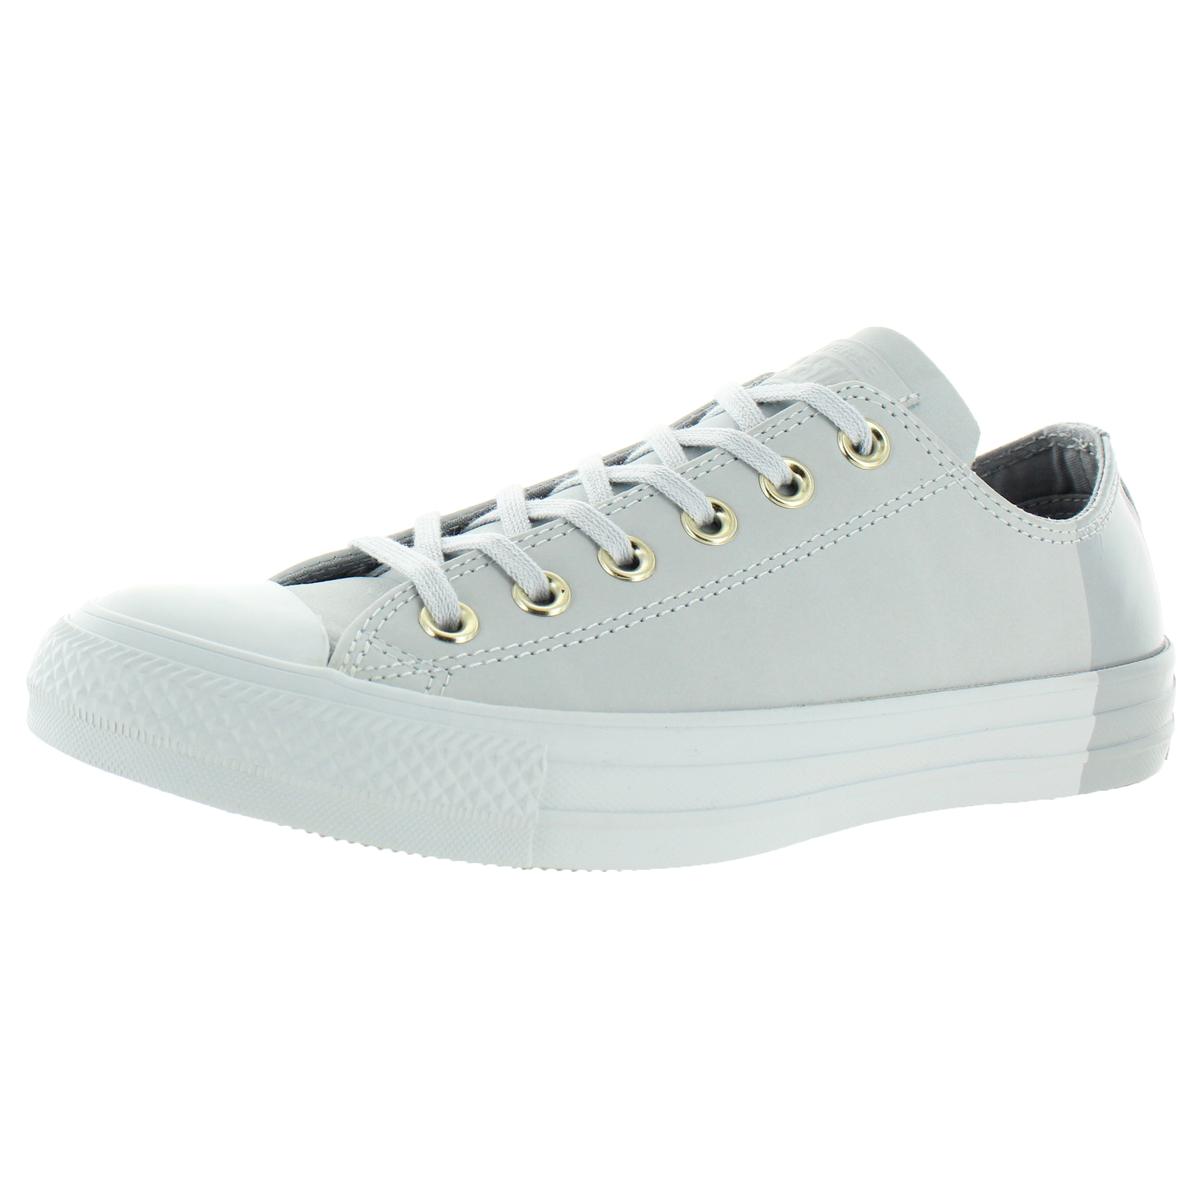 Converse Womens CTAS Ox Trainers Leather Low Top Sneakers Shoes BHFO ...